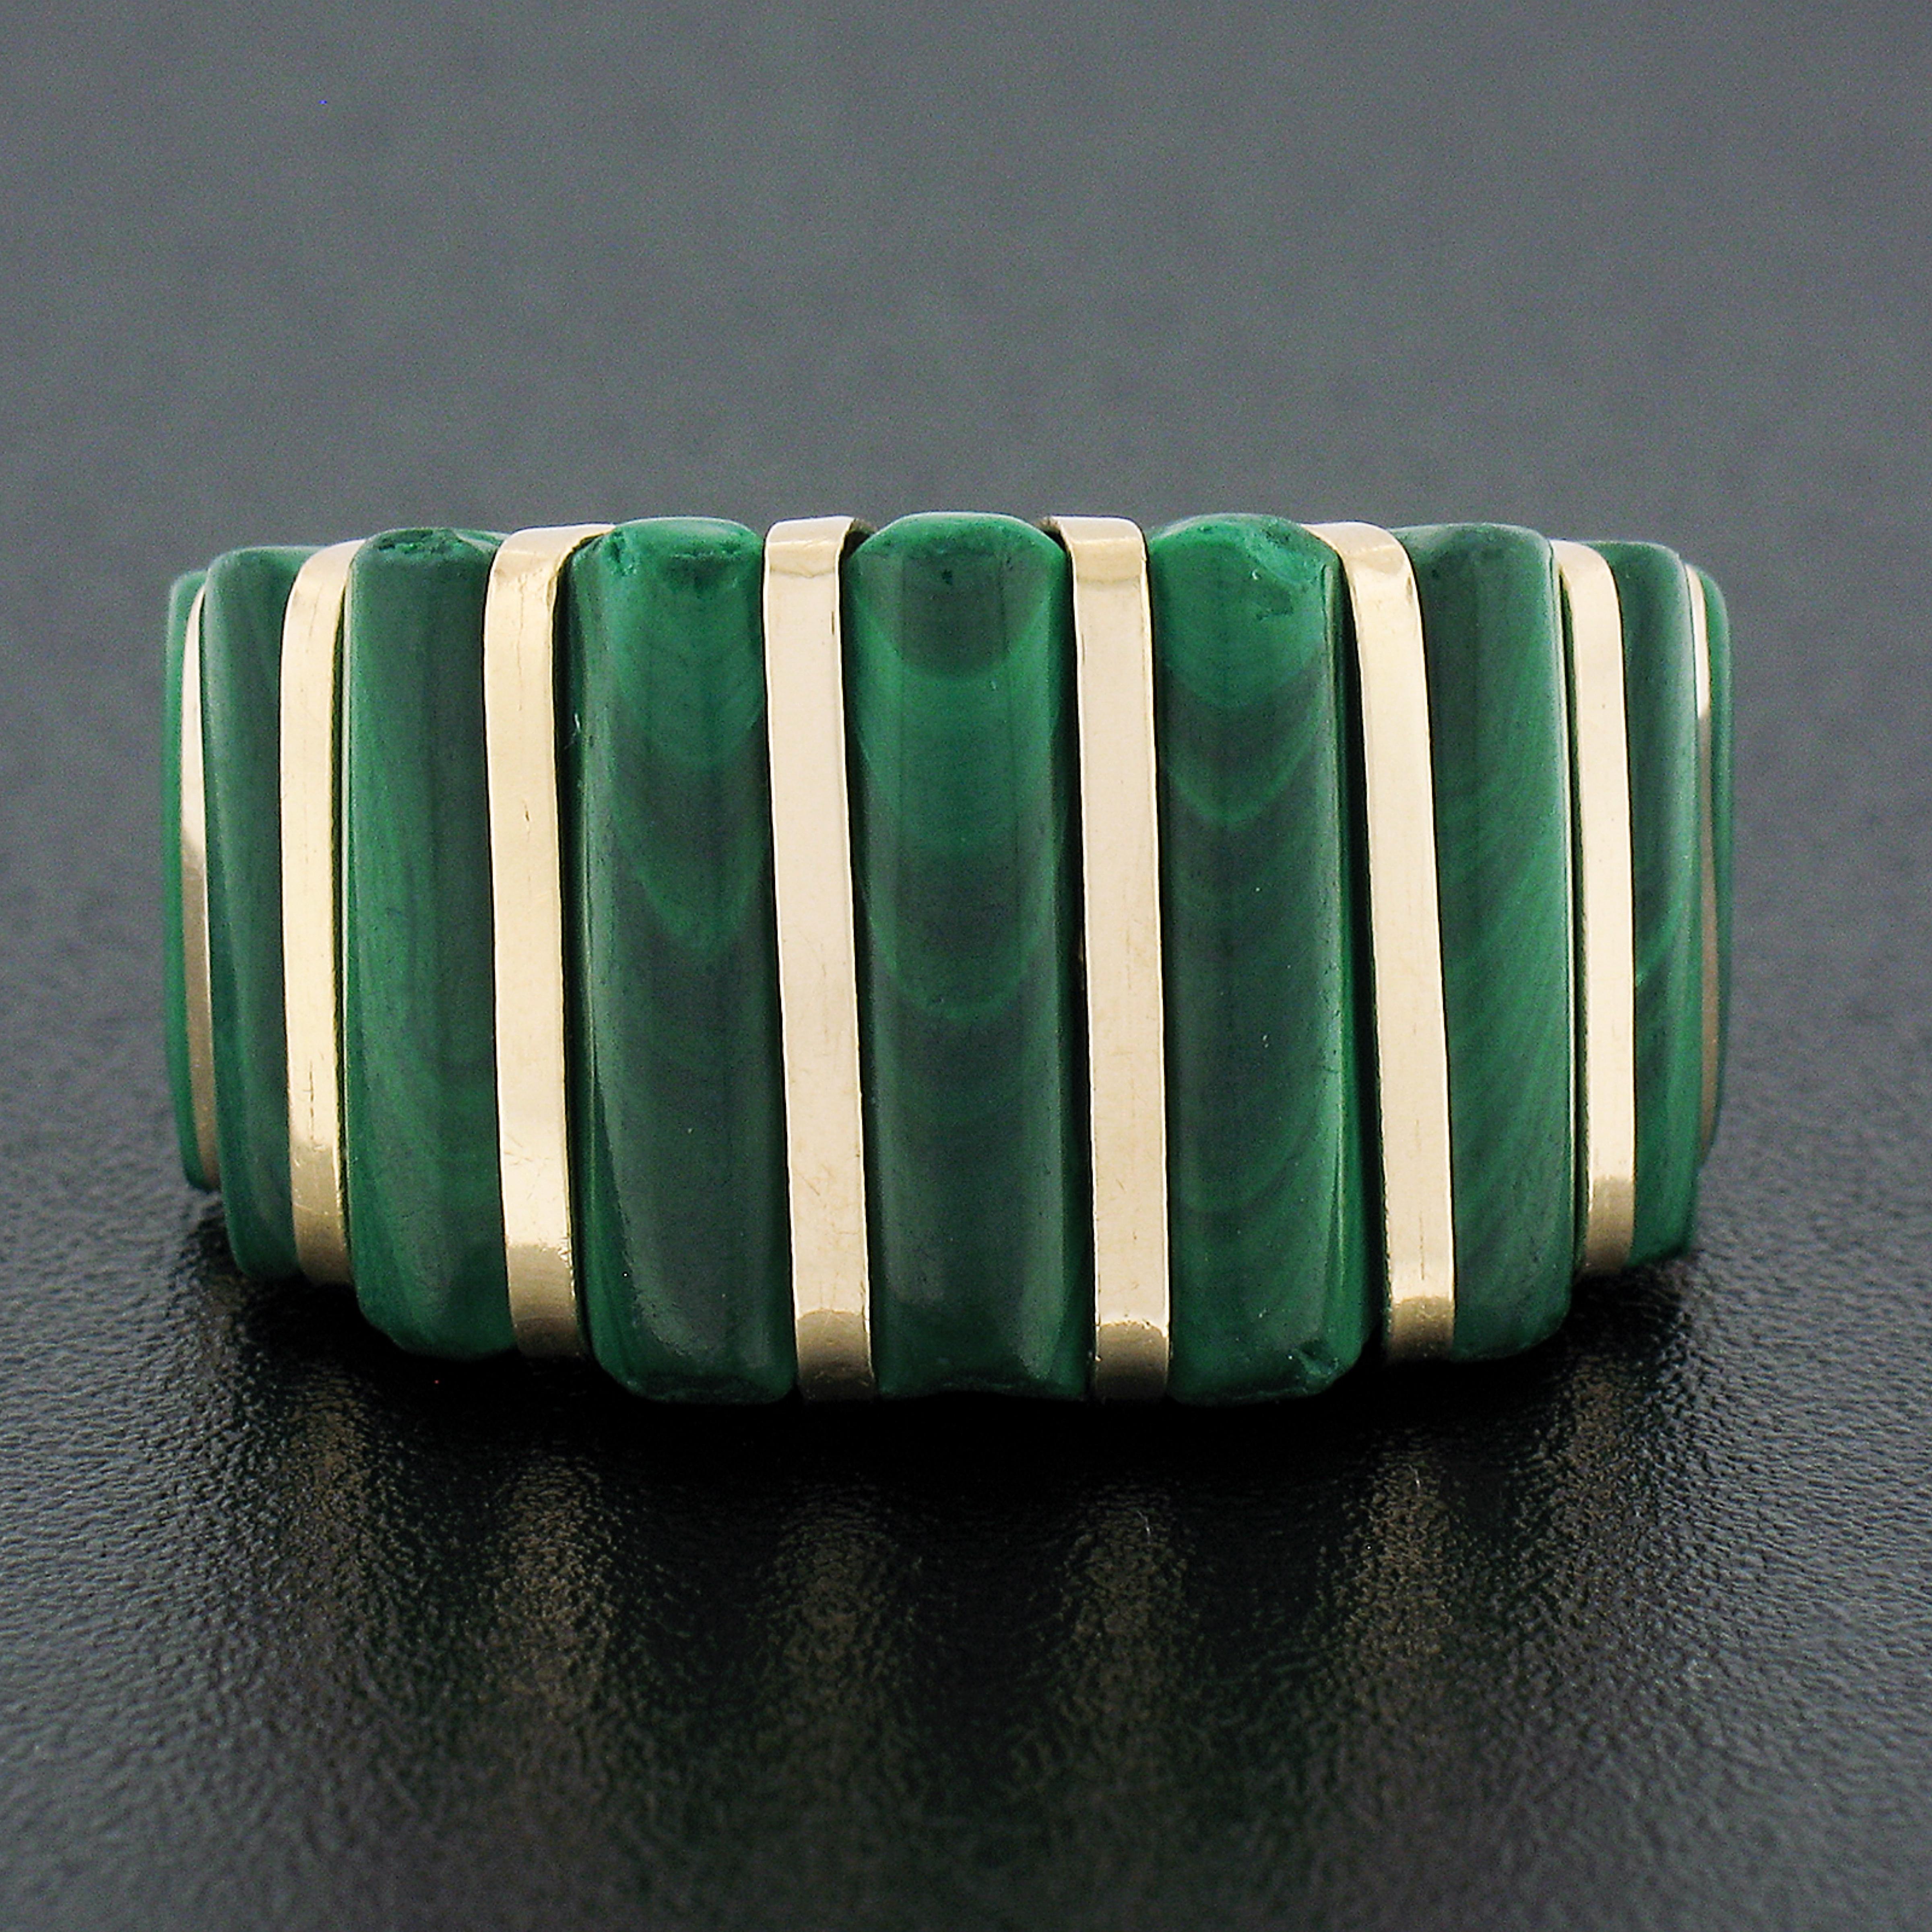 This magnificent statement ring is designed by MAZ and crafted from solid 14k yellow gold. It features a large domed top with a neat and elegant design that is constructed from inlaid set malachite stones and yellow gold stripes, in which slightly